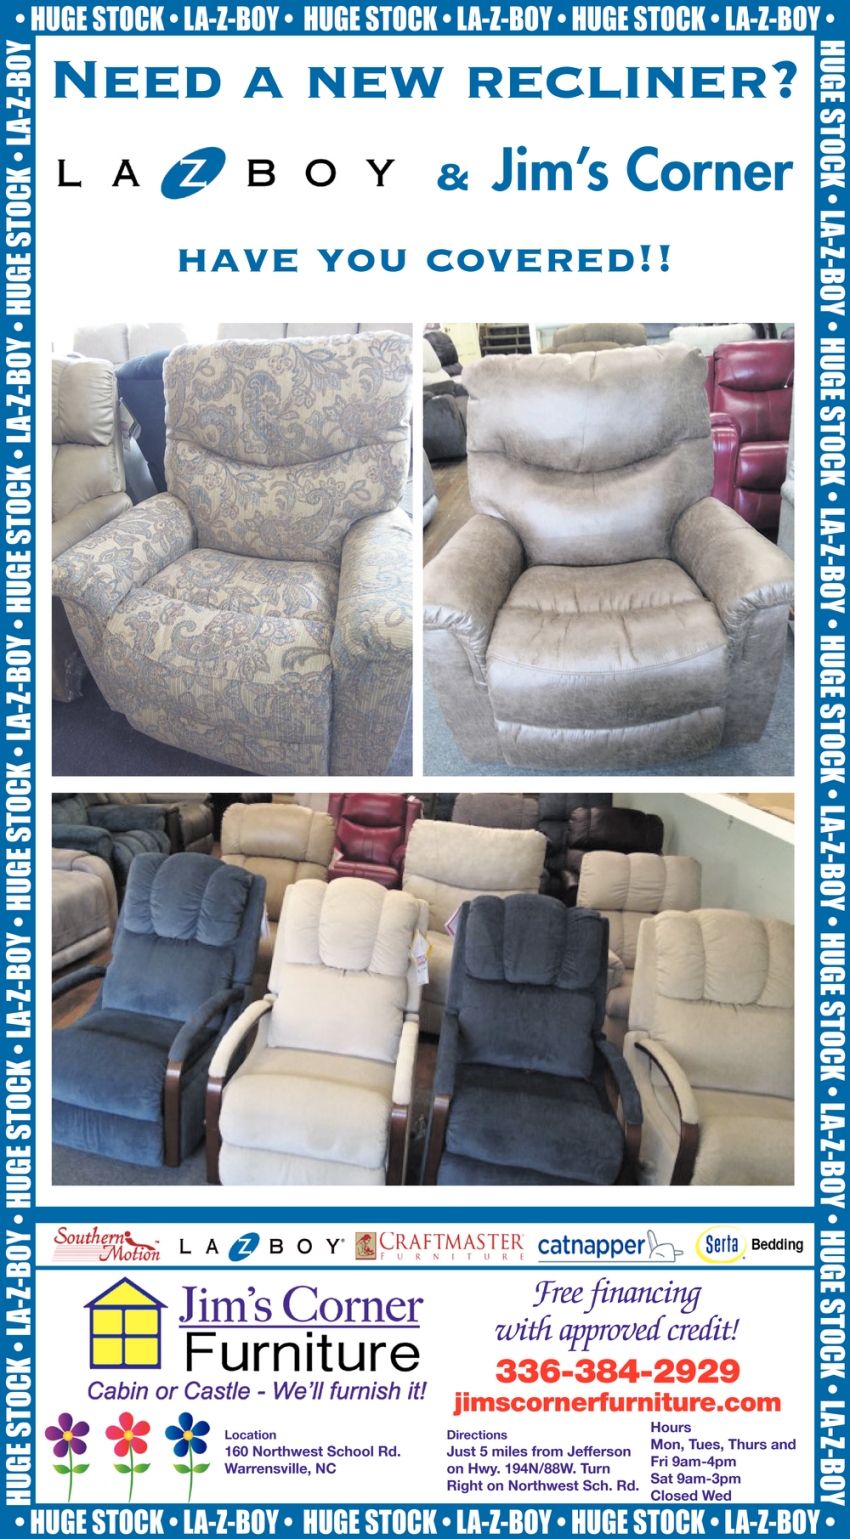 Need a New Recliner?